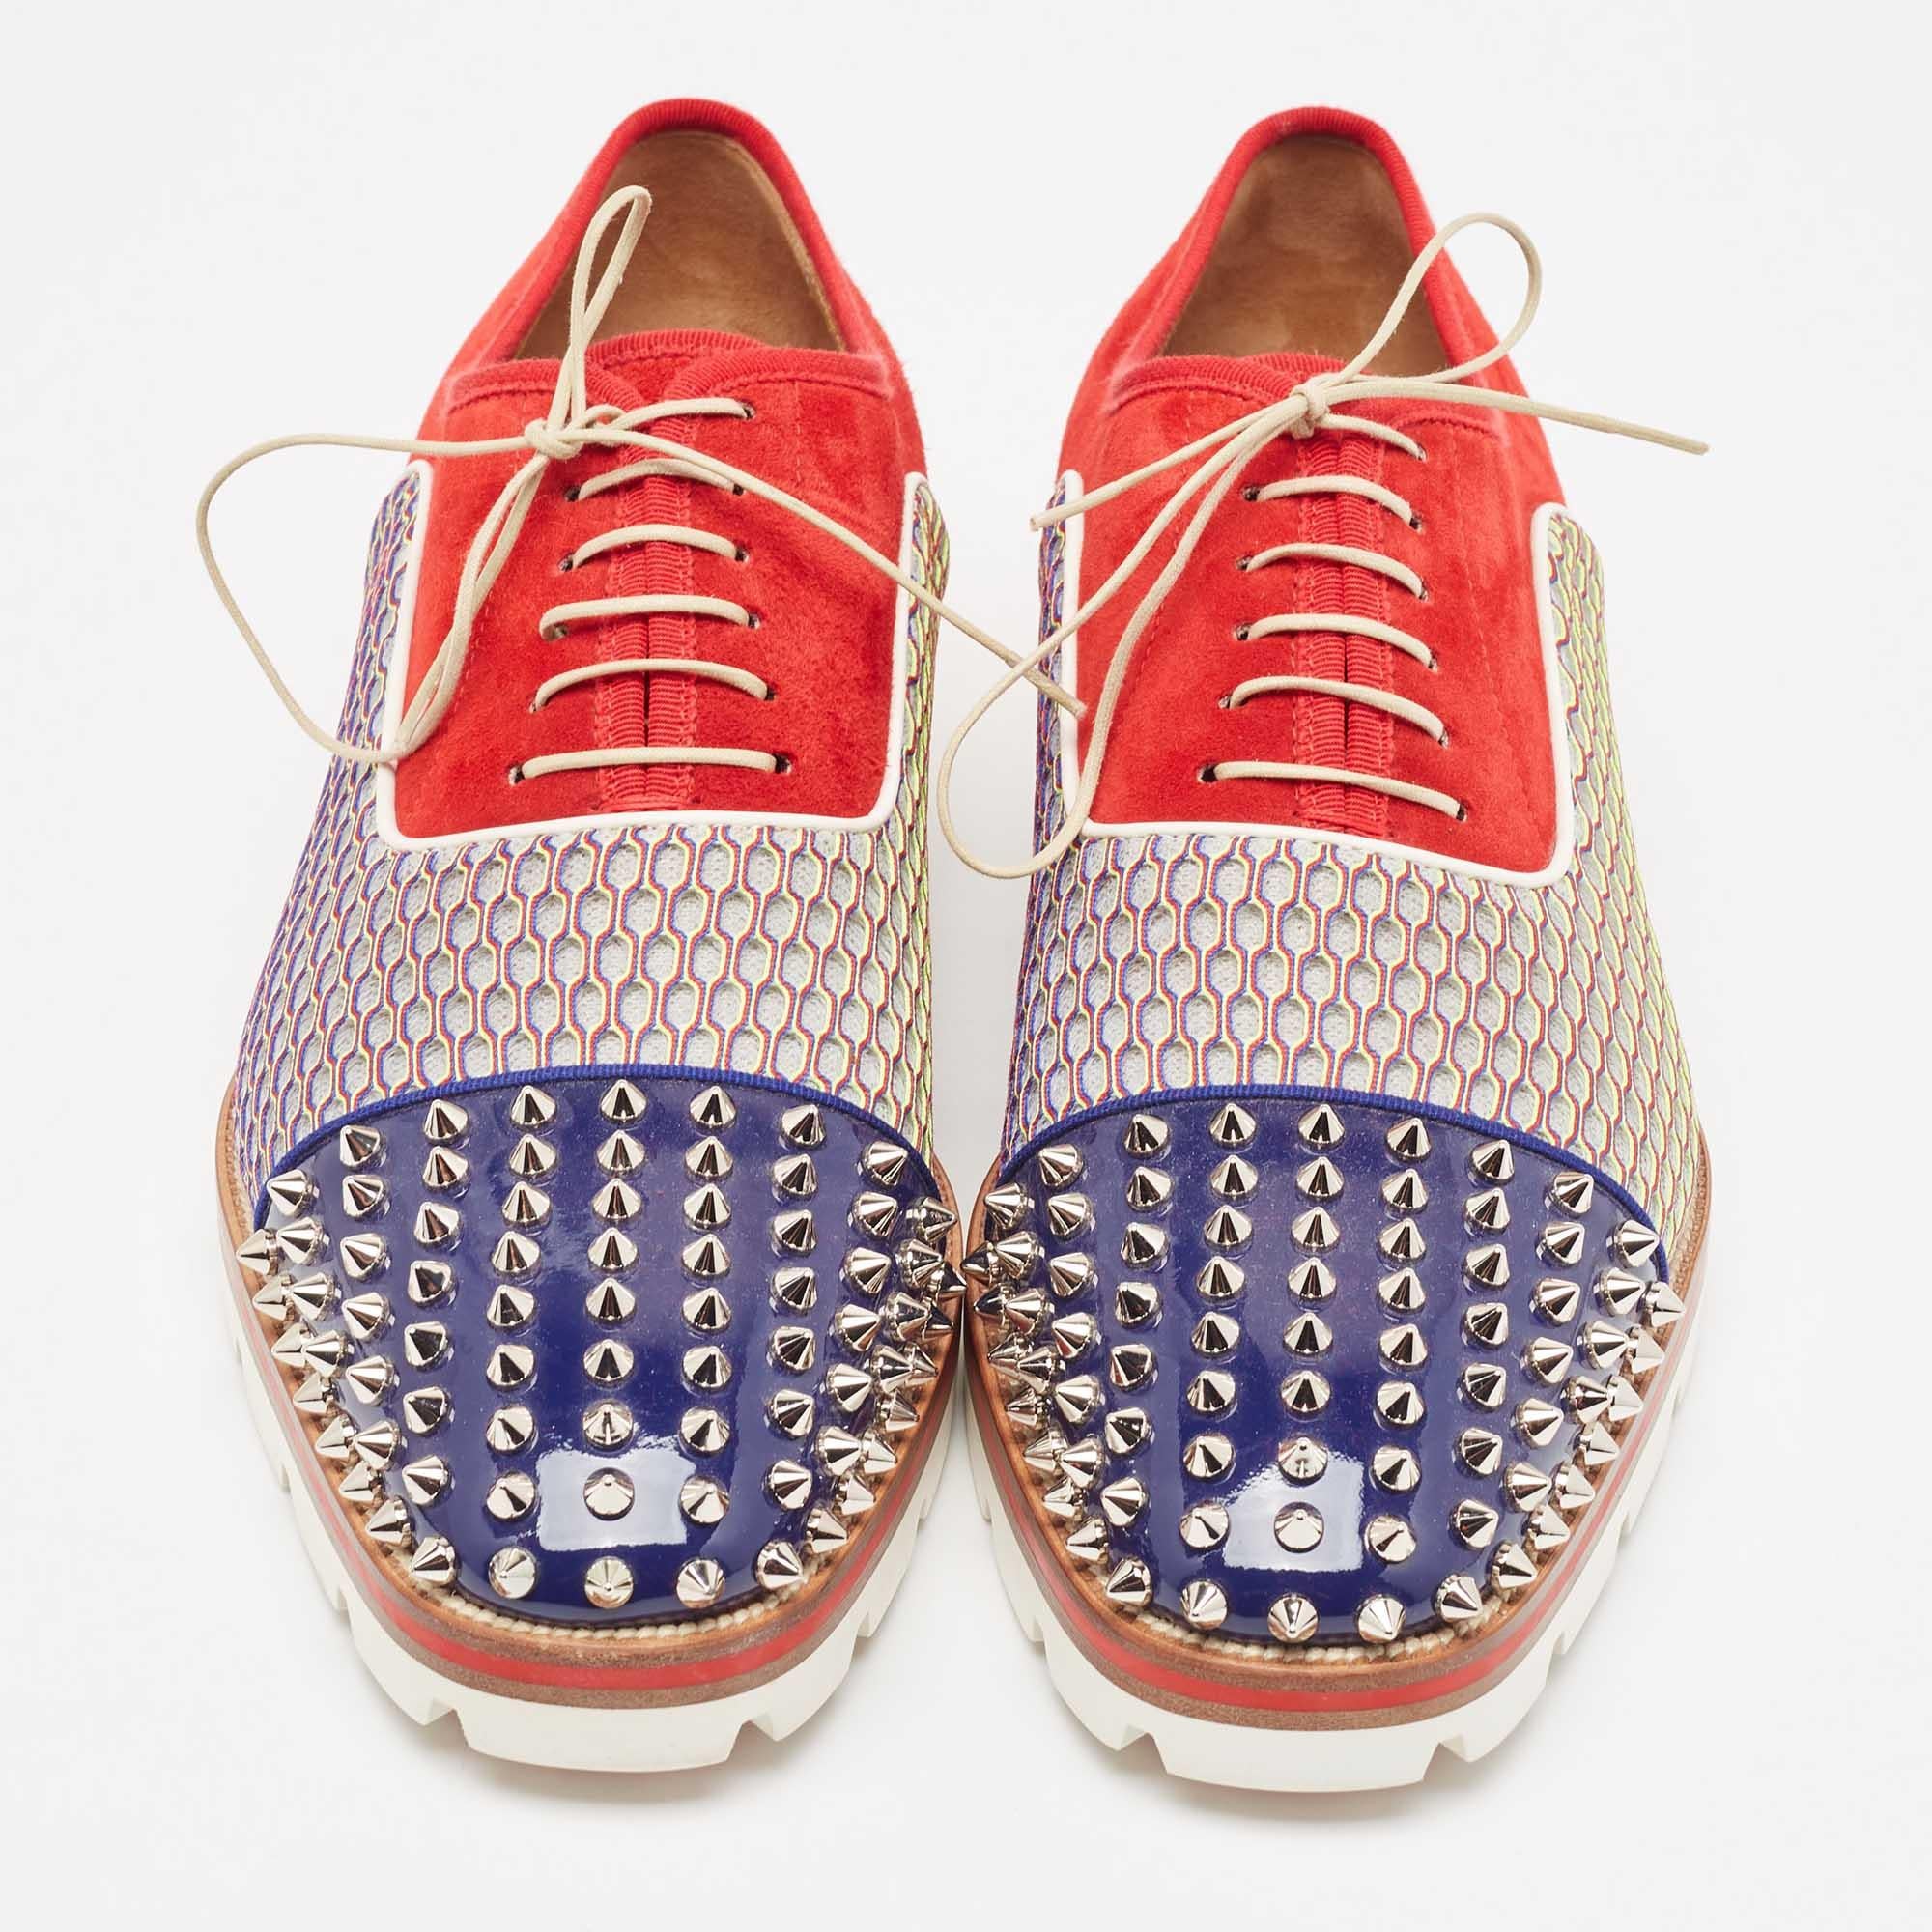 You'll find this pair of Christian Louboutin oxfords for men a fun addition to your shoe collection. Crafted immaculately, the shoes are constructed to give you a statement look.

Includes: Original Dustbag

